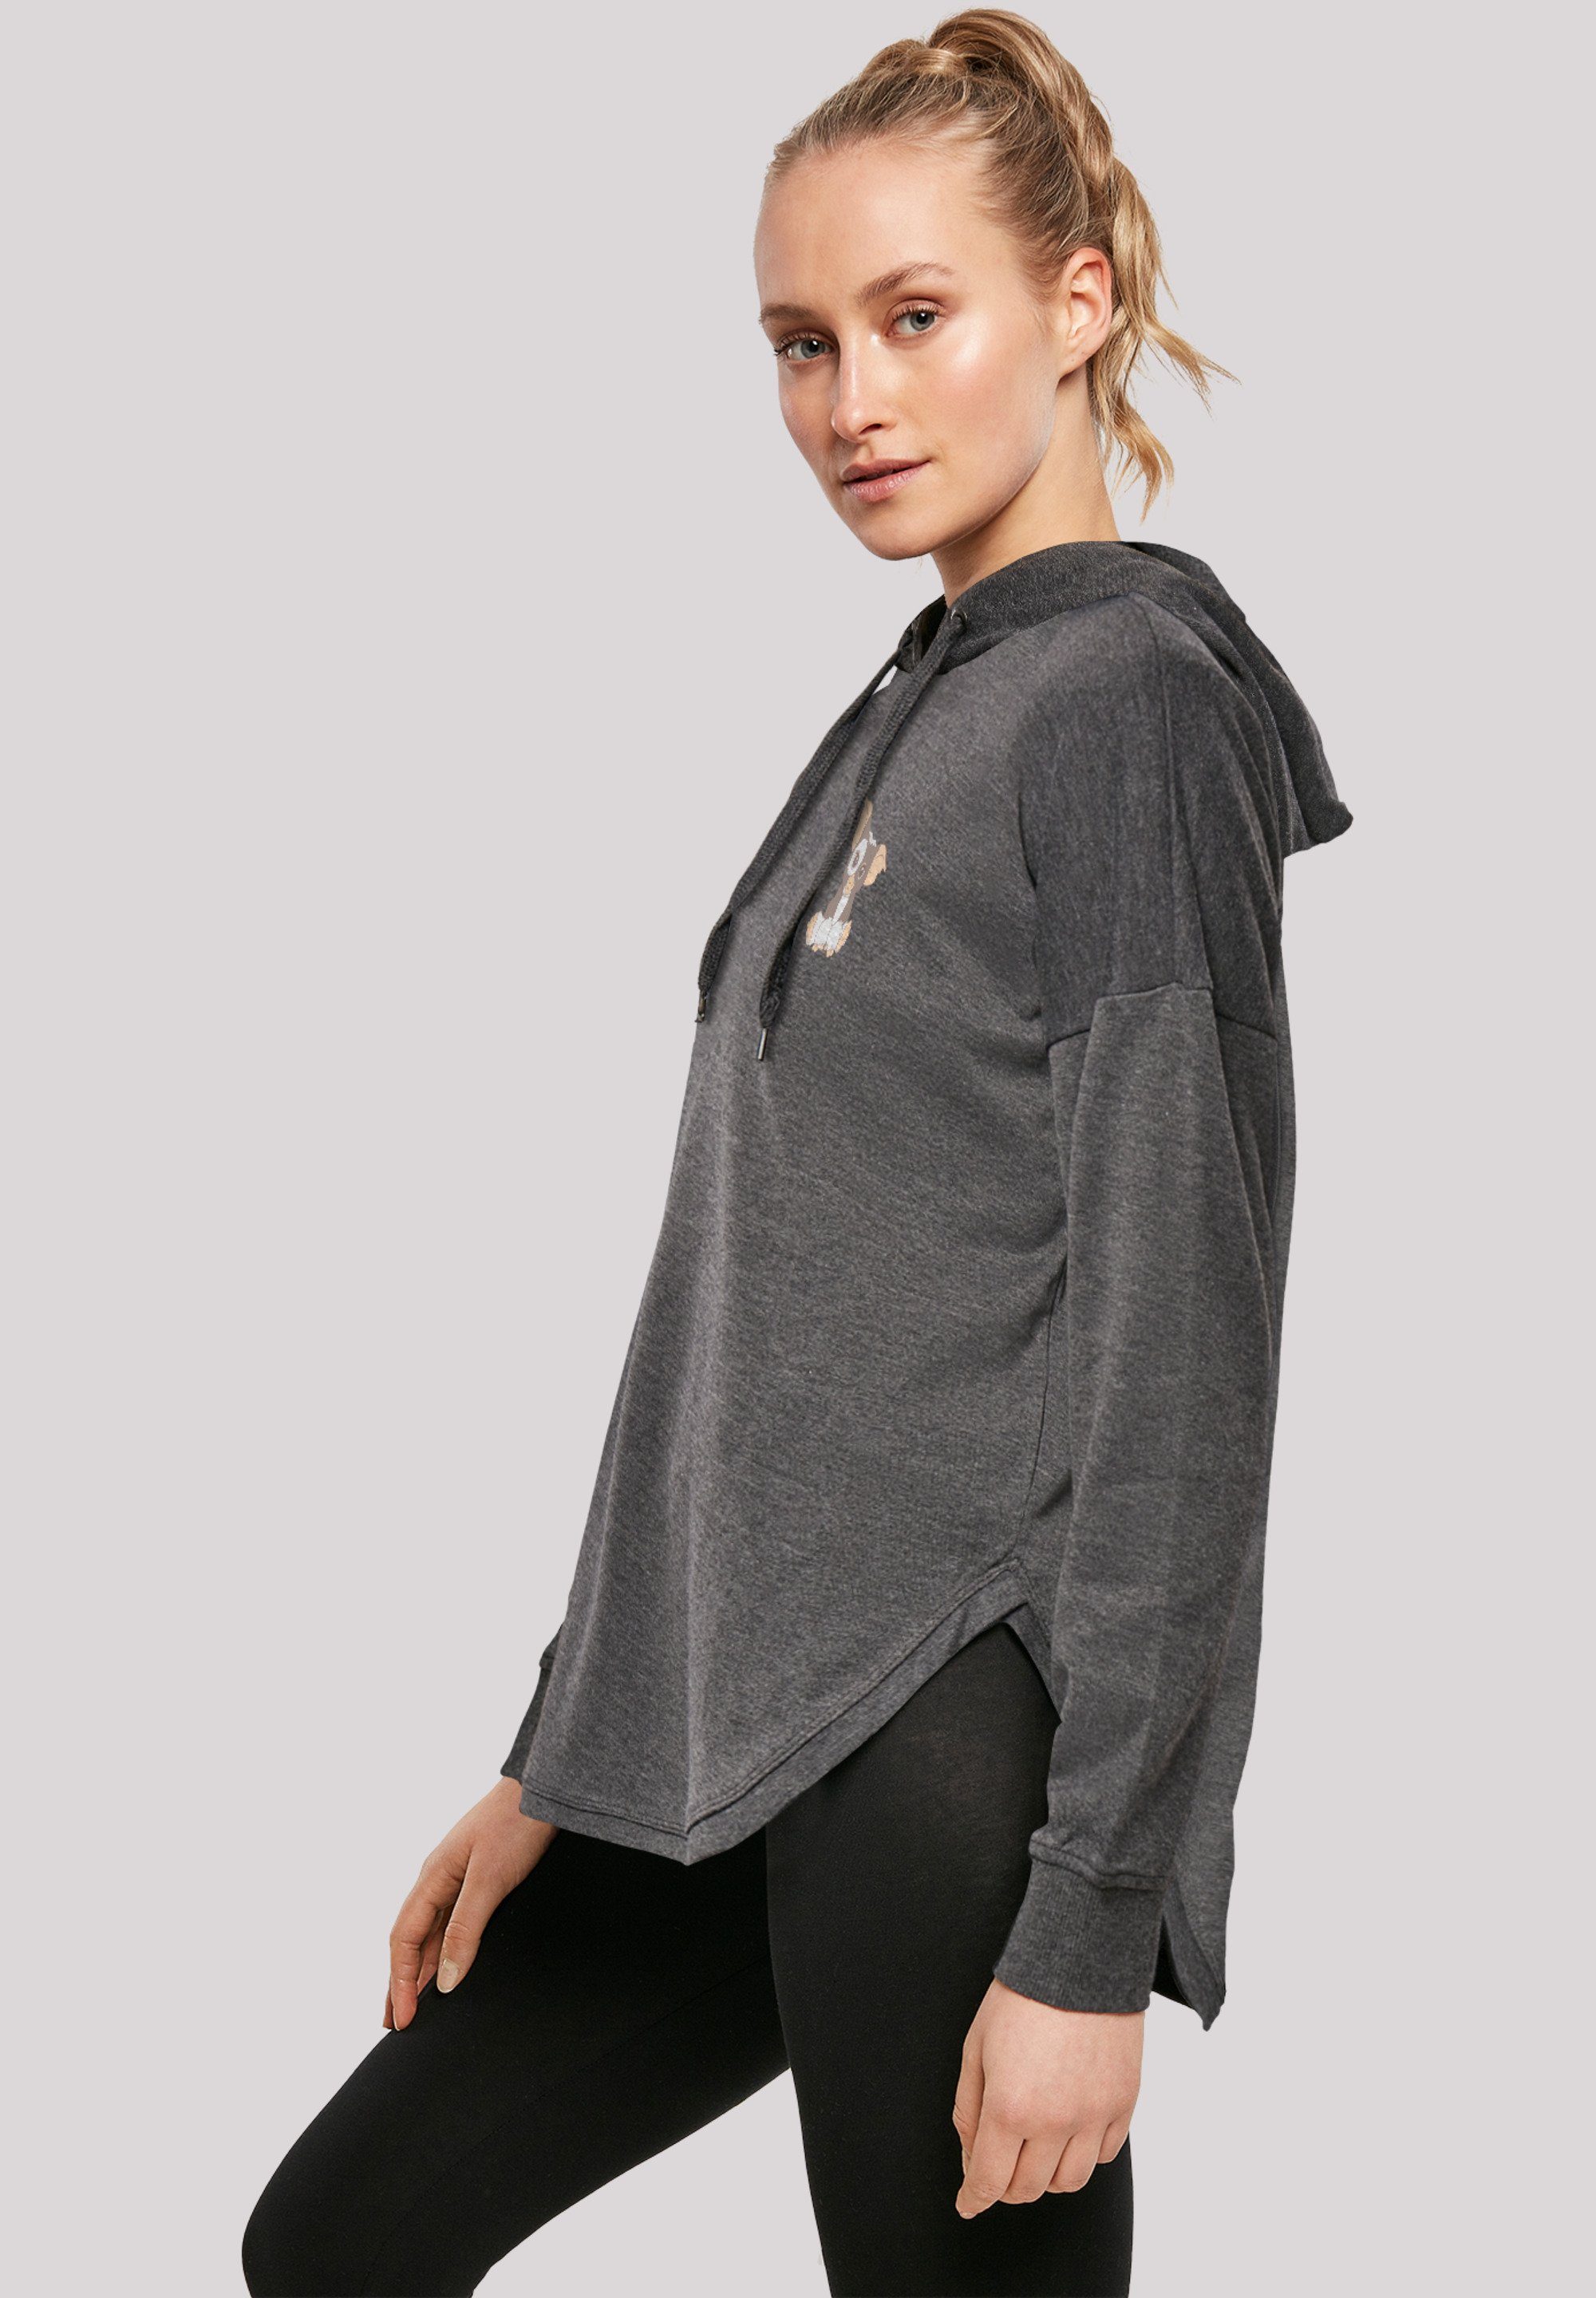 F4NT4STIC Hoody and Ladies Damen with Gremlins Kapuzenpullover Gizmo -BLK Oversized charcoal Chest (1-tlg)